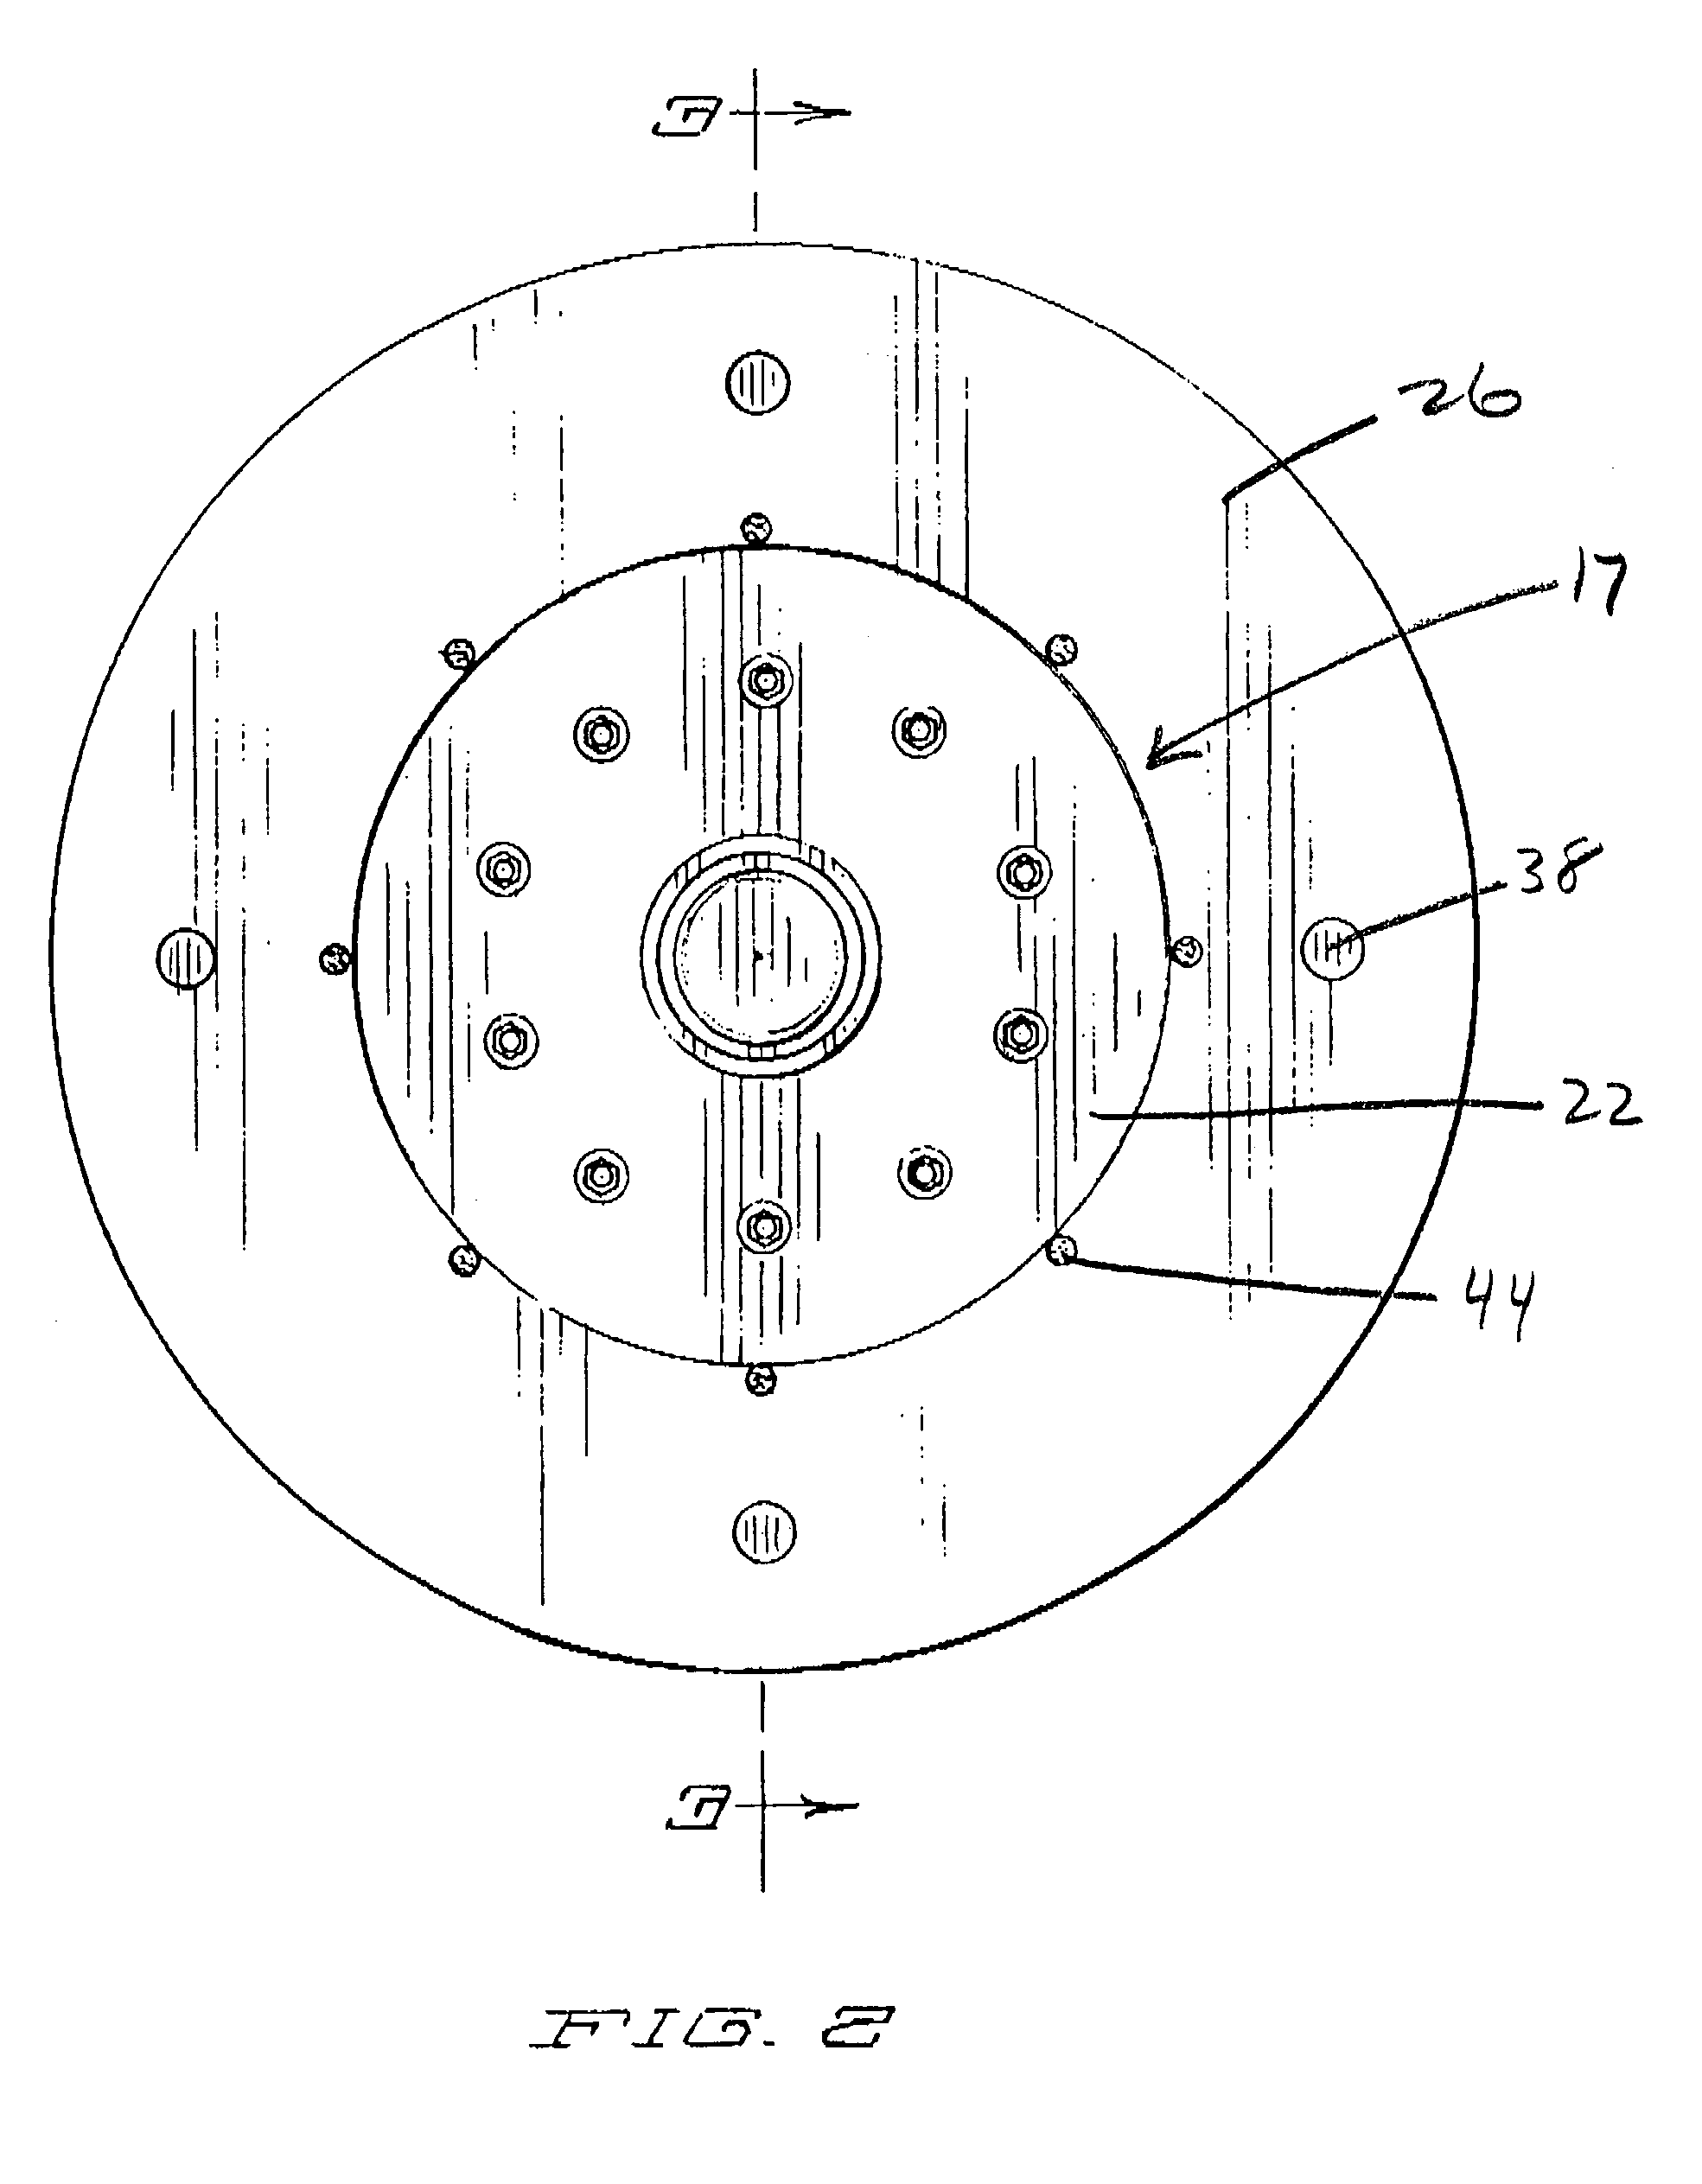 Hammermill with stub shaft rotor apparatus and method